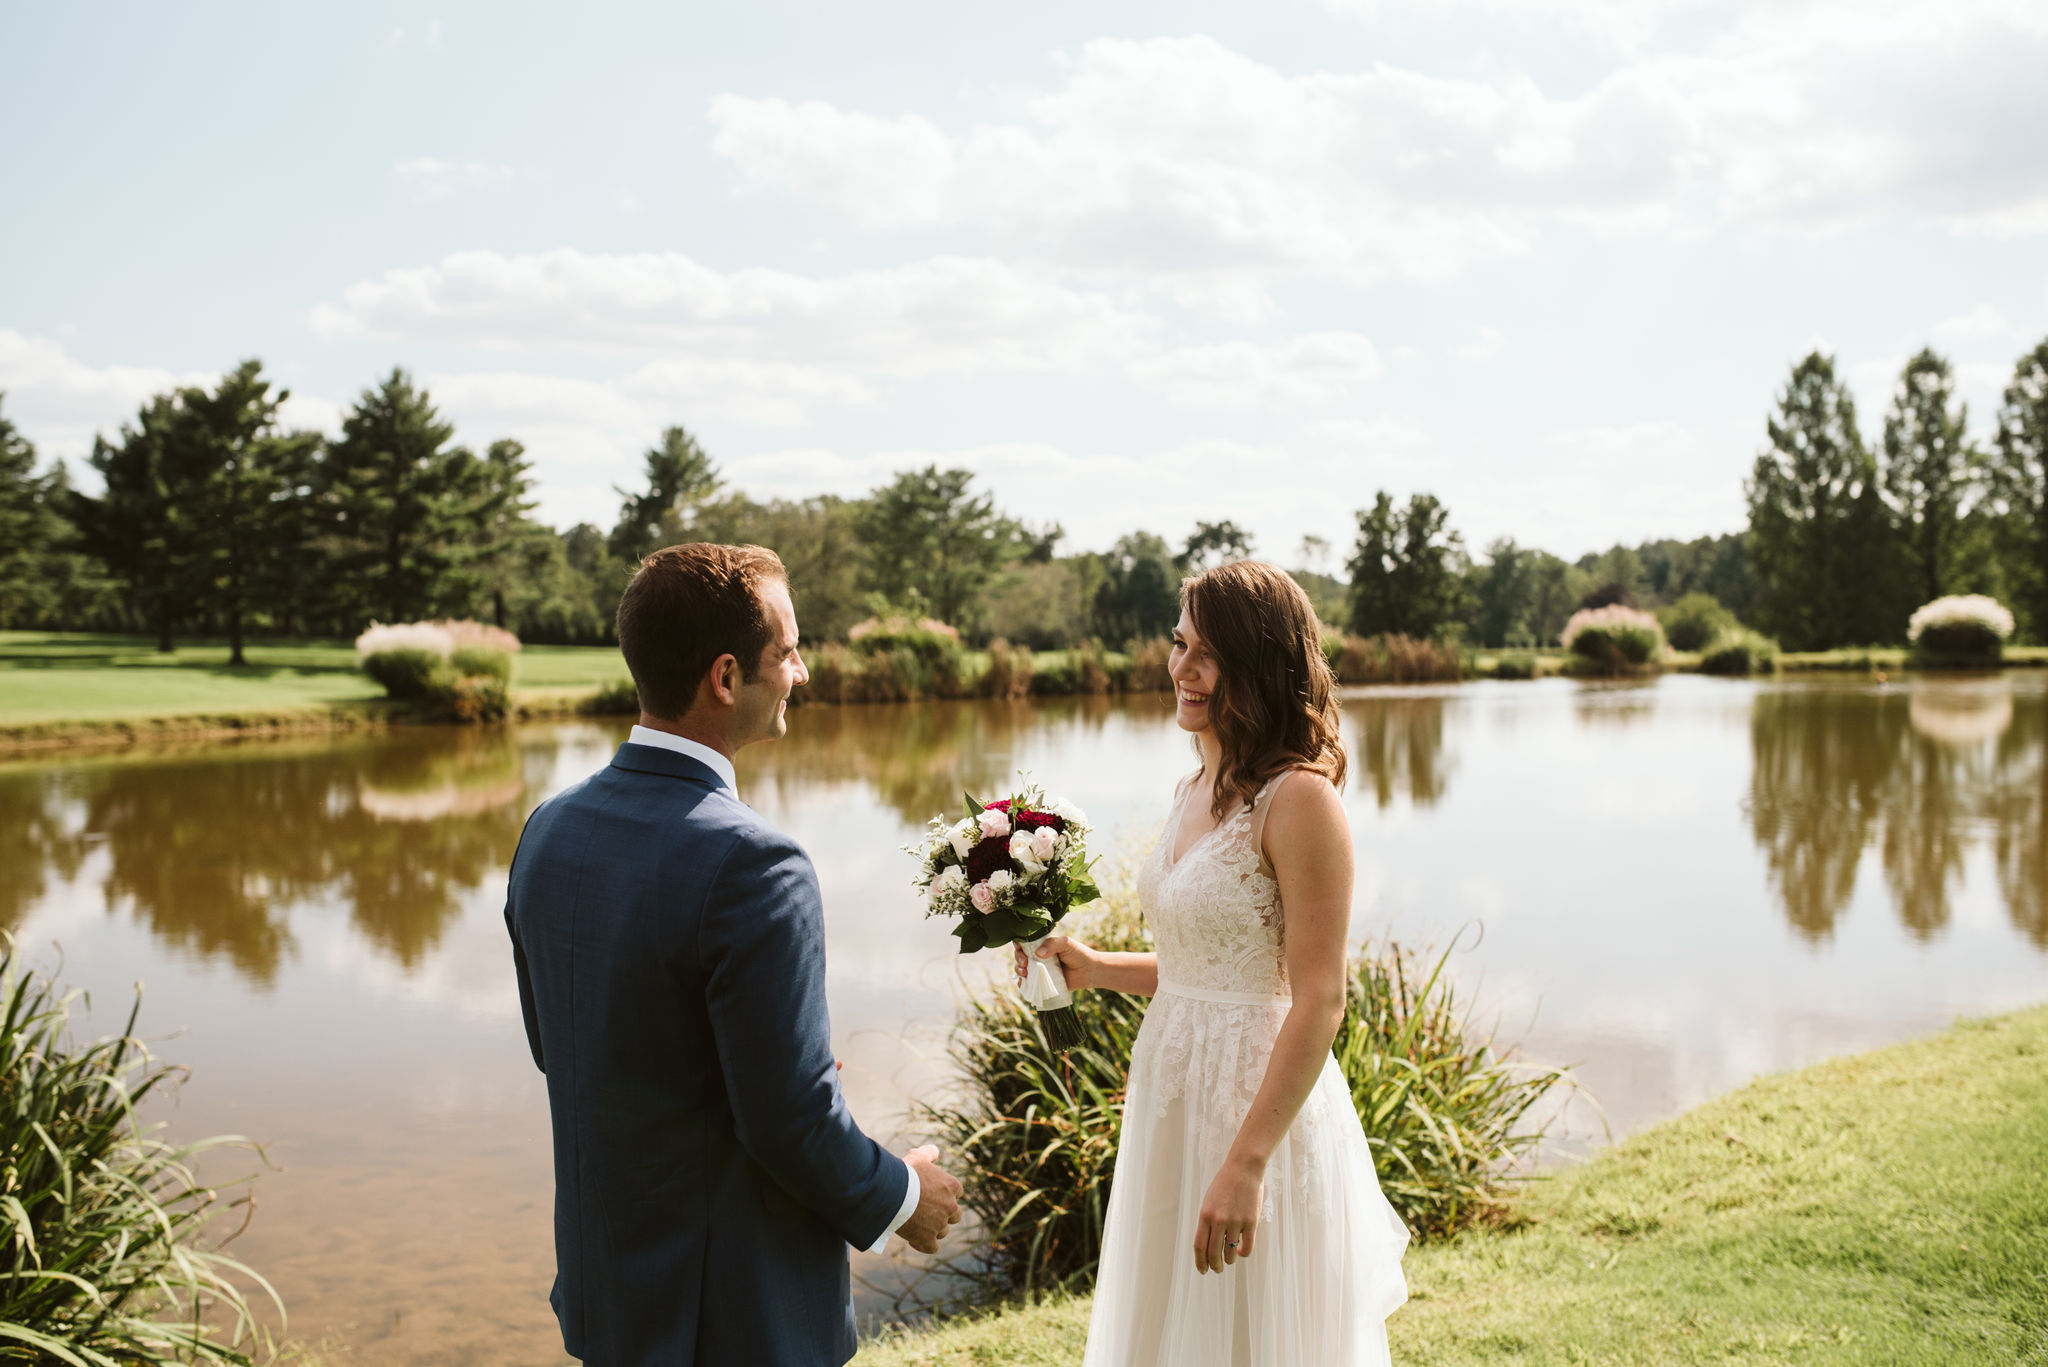  Phoenix Maryland, Baltimore Wedding Photographer, Eagle’s Nest Country Club, Classic, Romantic, Spring, BHLDN Dress, First Look, Dundalk Florist, Bride and Groom Outside by Water 